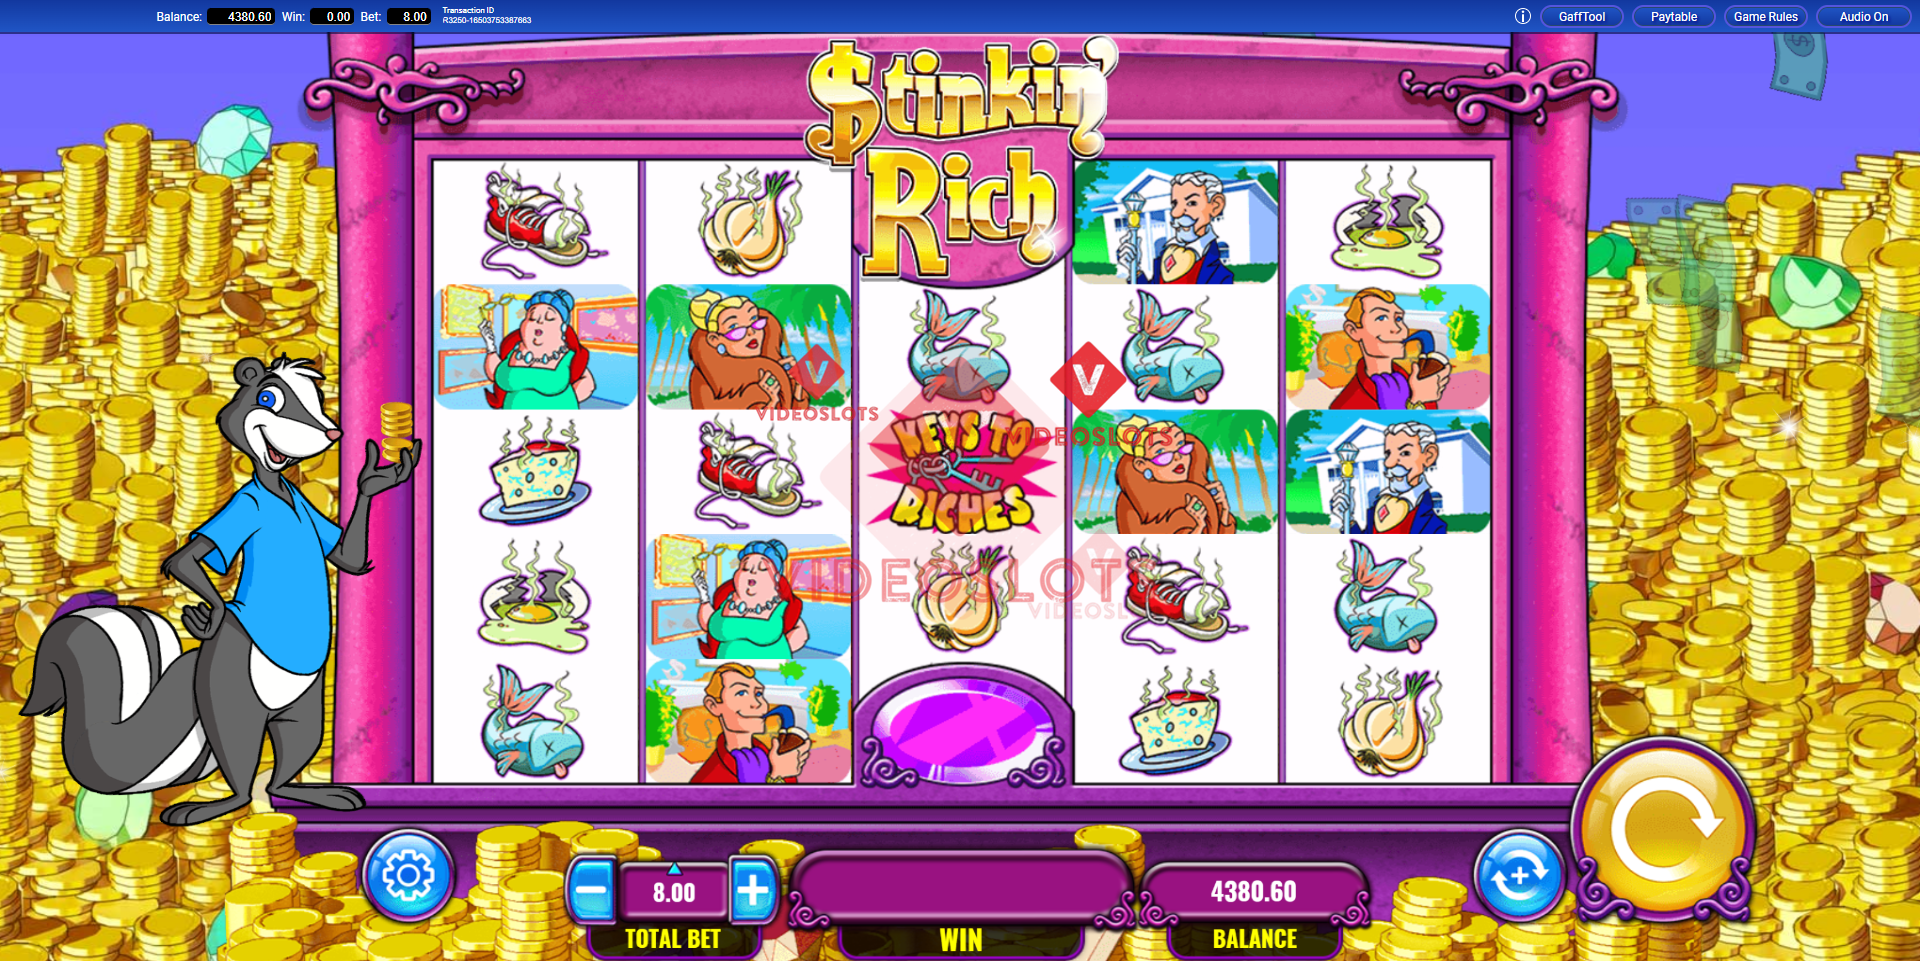 Base Game for Stinkin' Rich slot from IGT